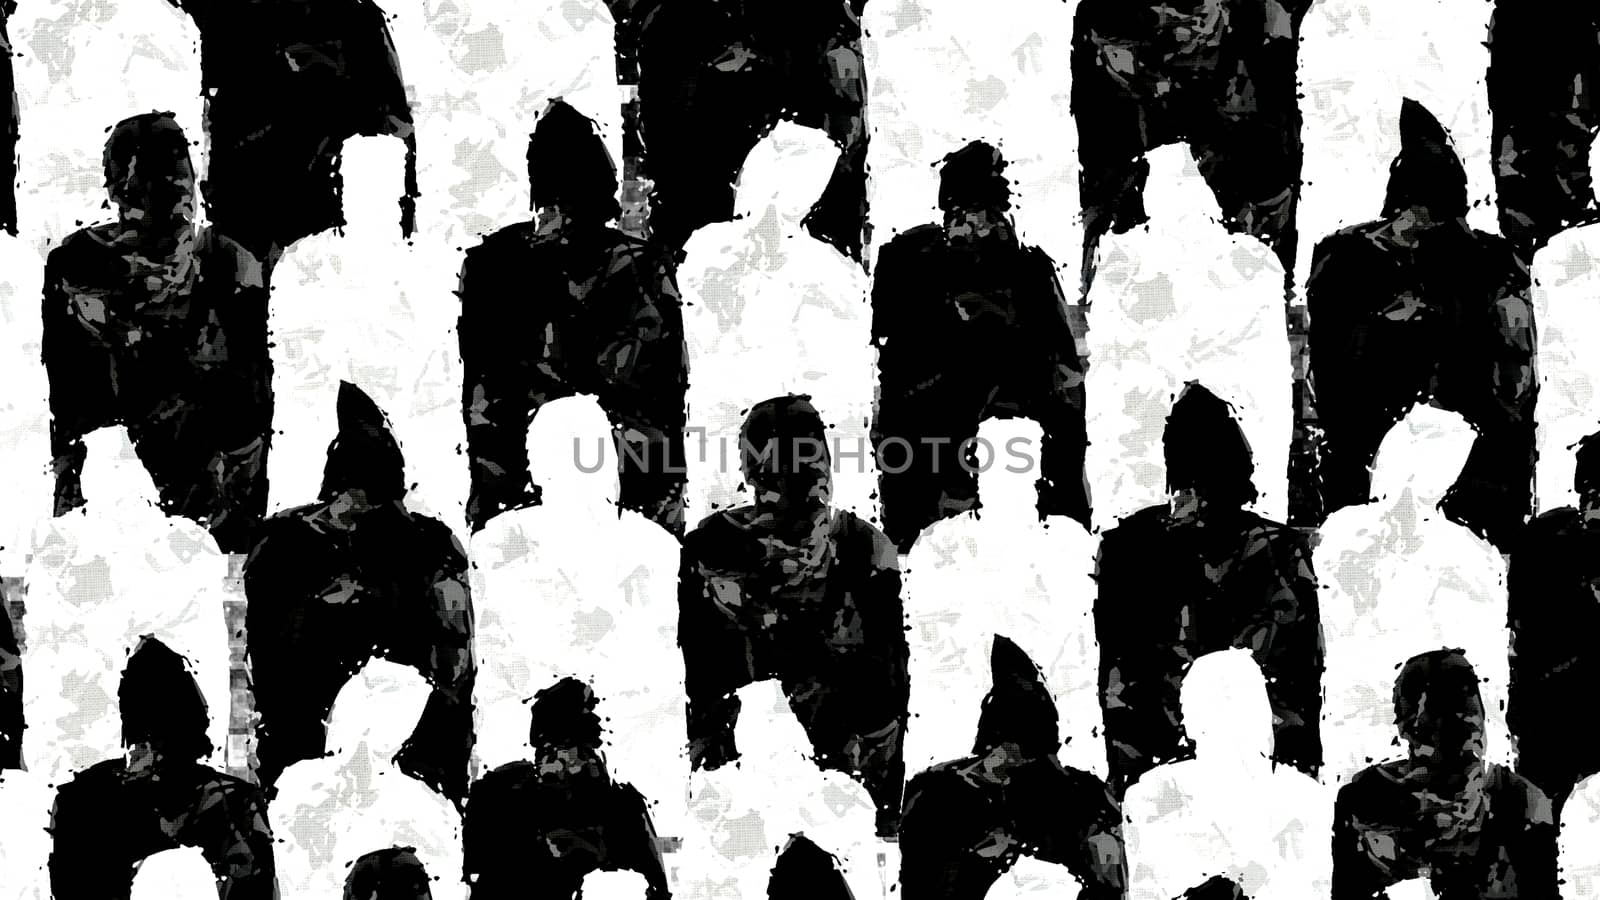 Impressive 3d rendering of a wall made of standard black and white unisex people dressed in raincoats and hoods. They look soulless and thought provoking.